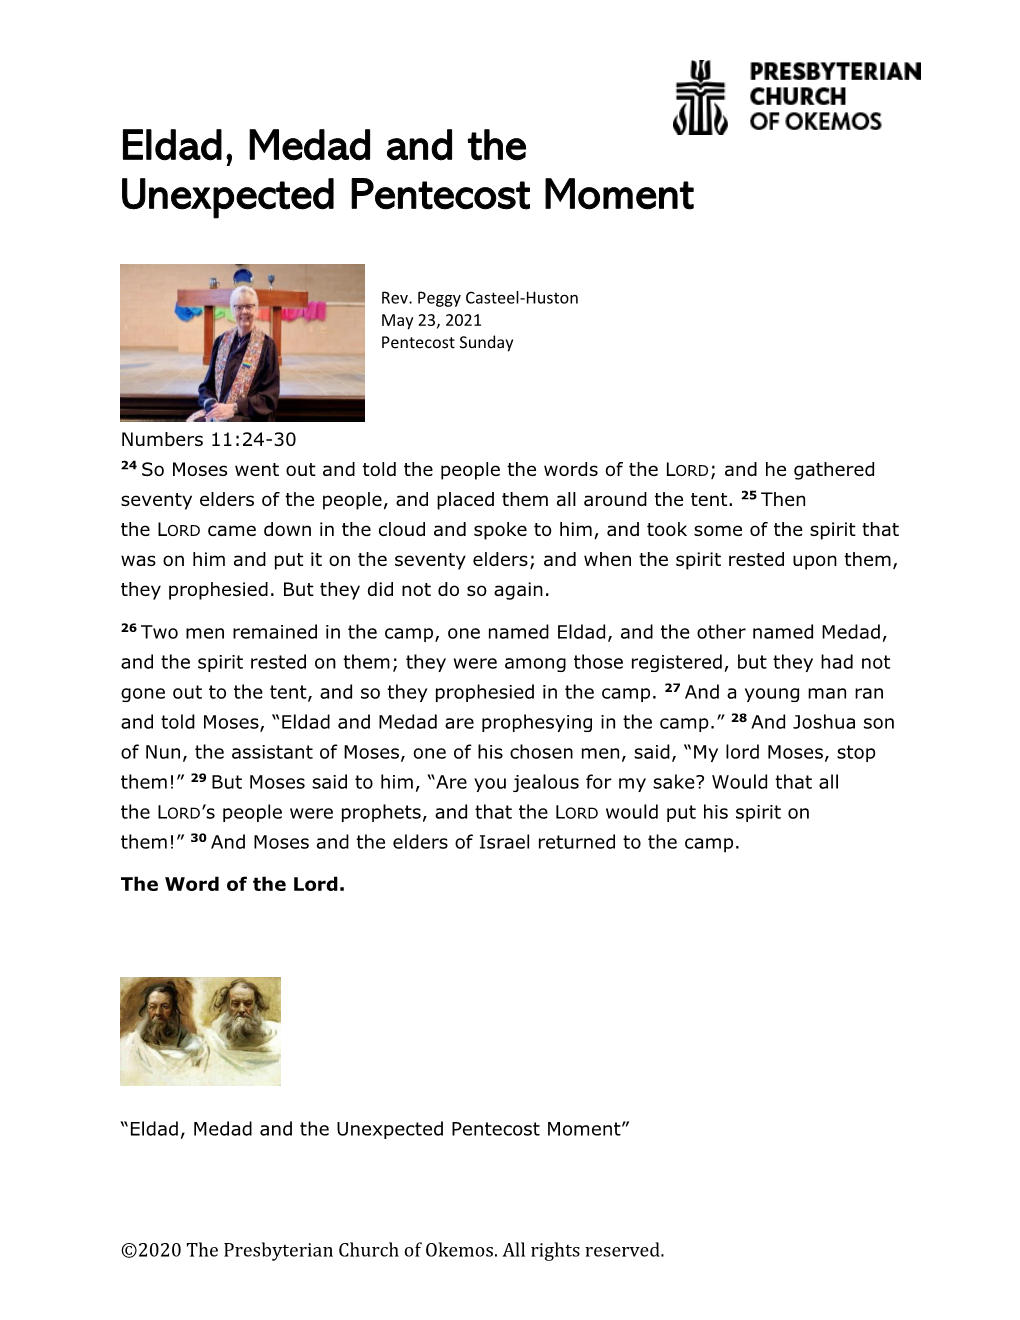 Eldad, Medad and the Unexpected Pentecost Moment